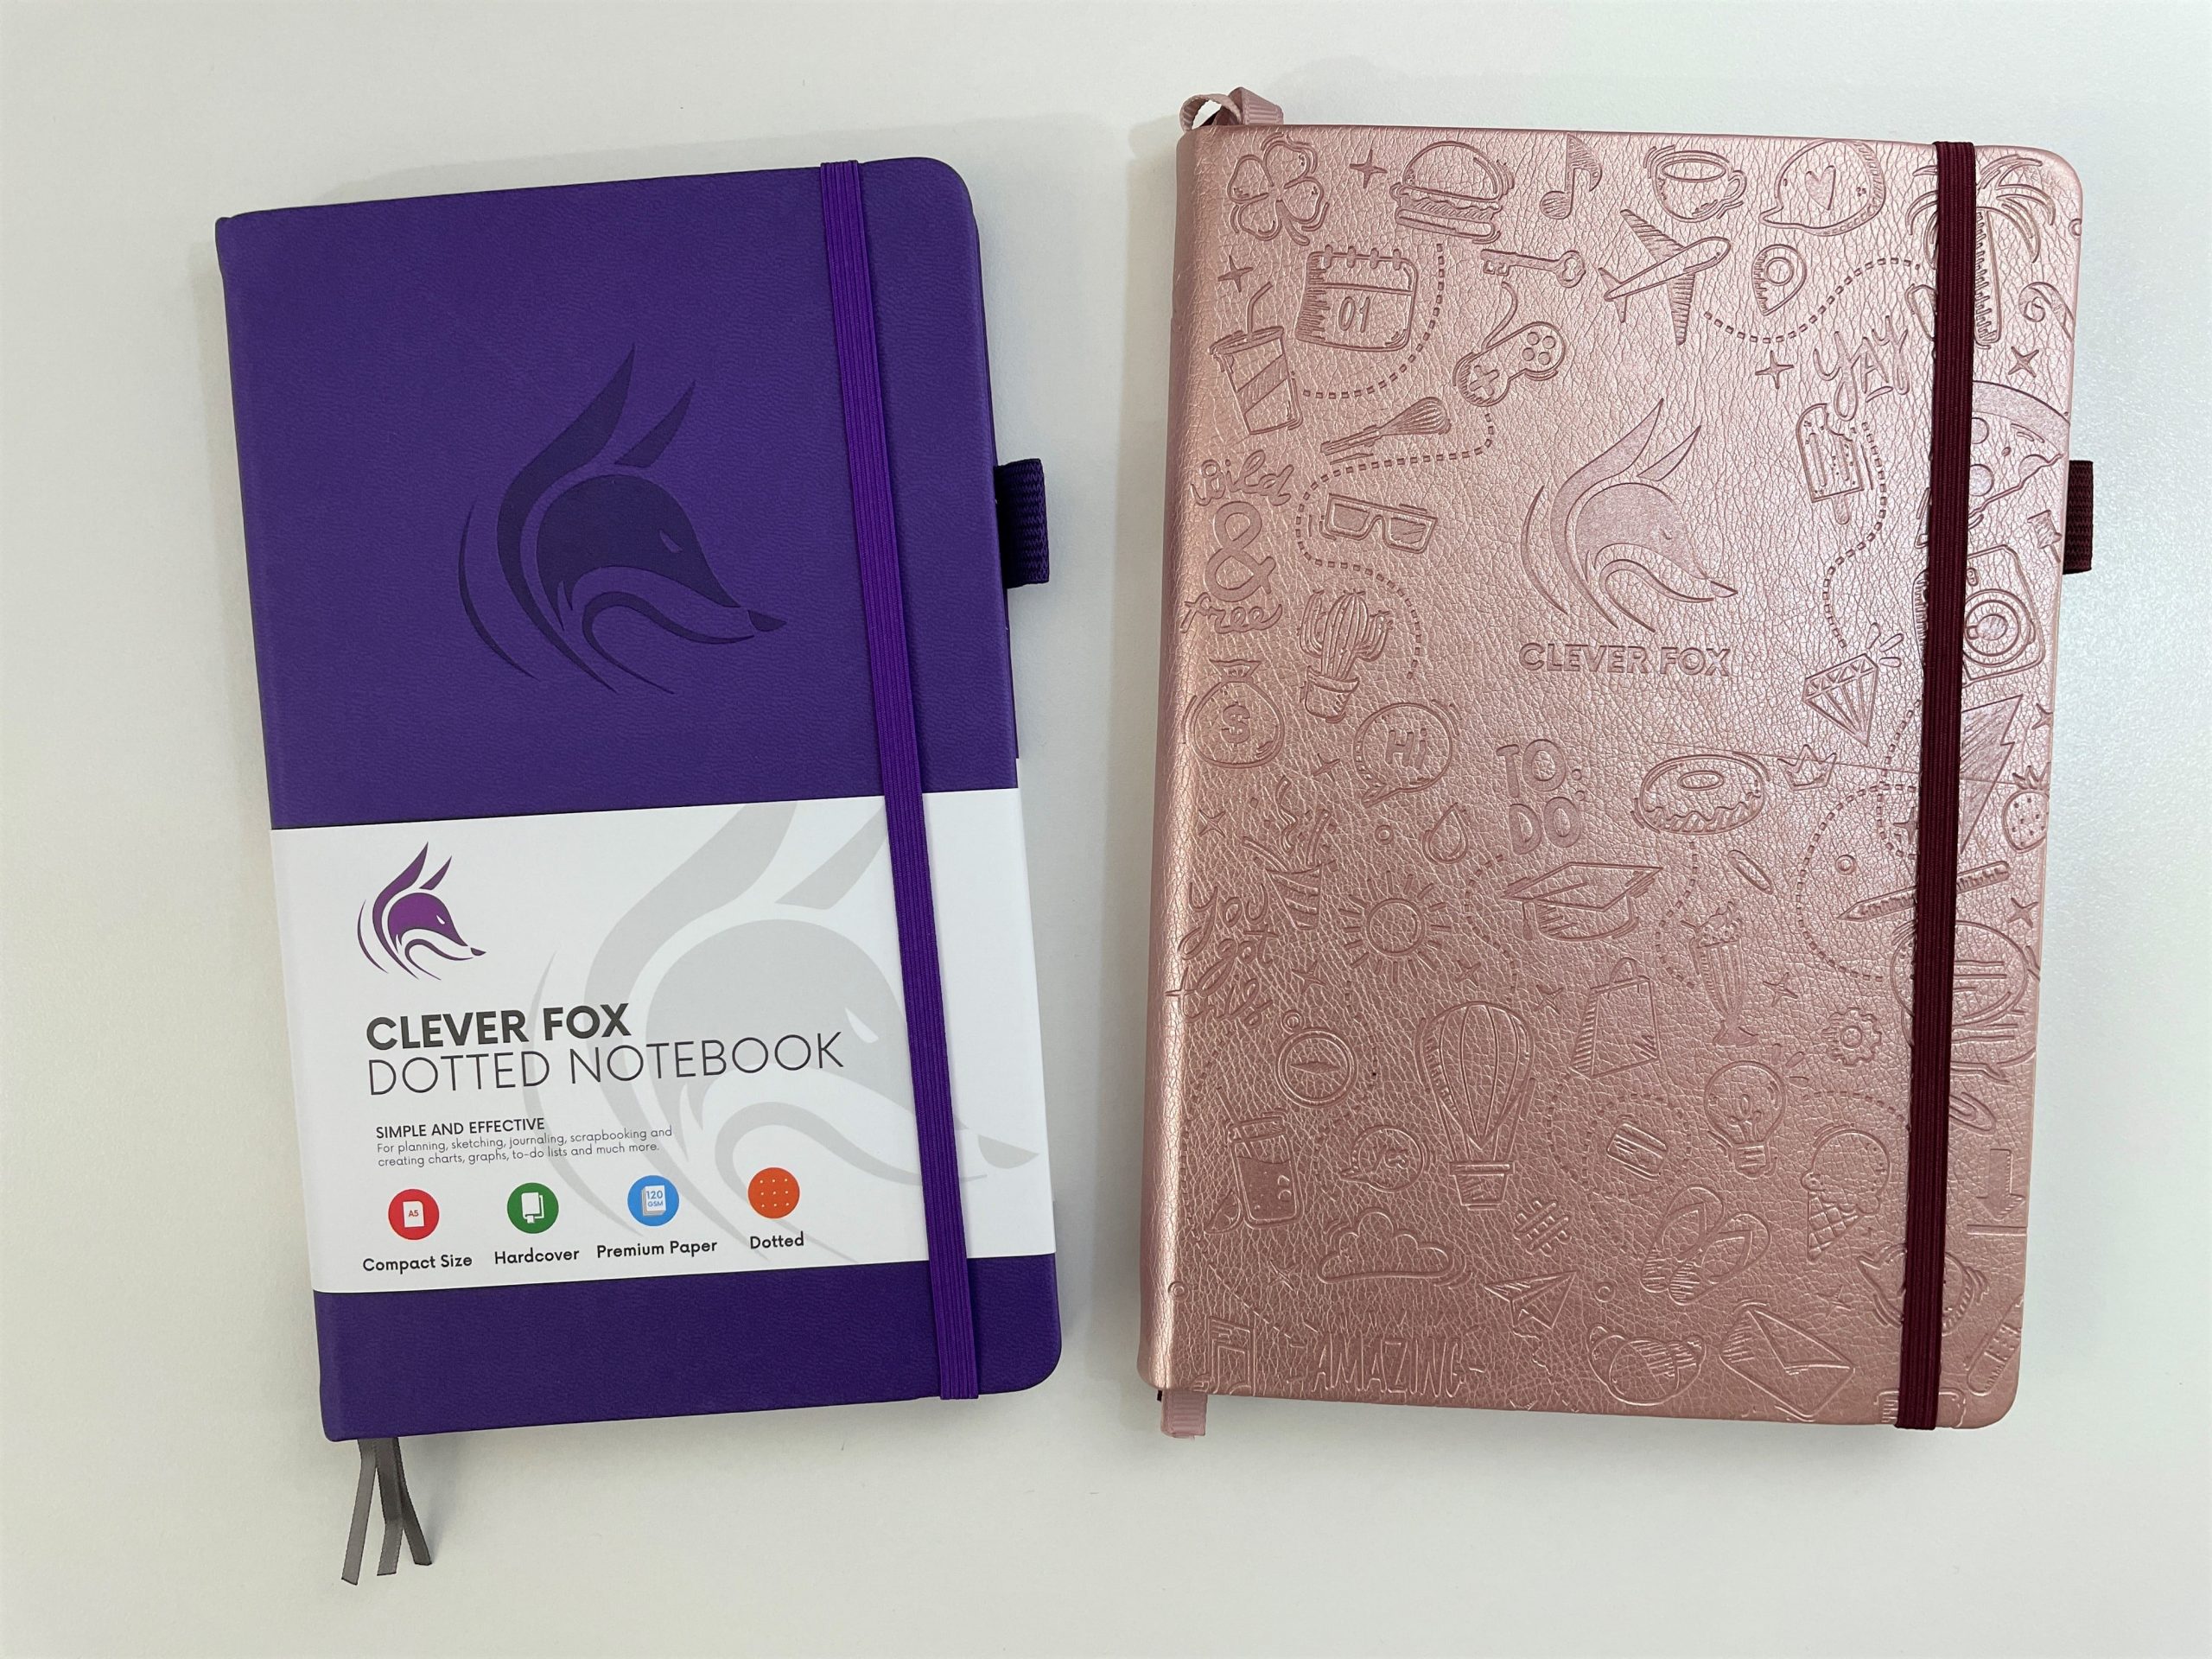 https://allaboutplanners.com.au/wp-content/uploads/2021/11/clever-fox-dotted-notebook-versus-journal-2.0-version-pros-and-cons-video-pen-test-paper-quality-numbered-pages-pocket-folder-page-size-ribbon-bookmark-min-scaled.jpg